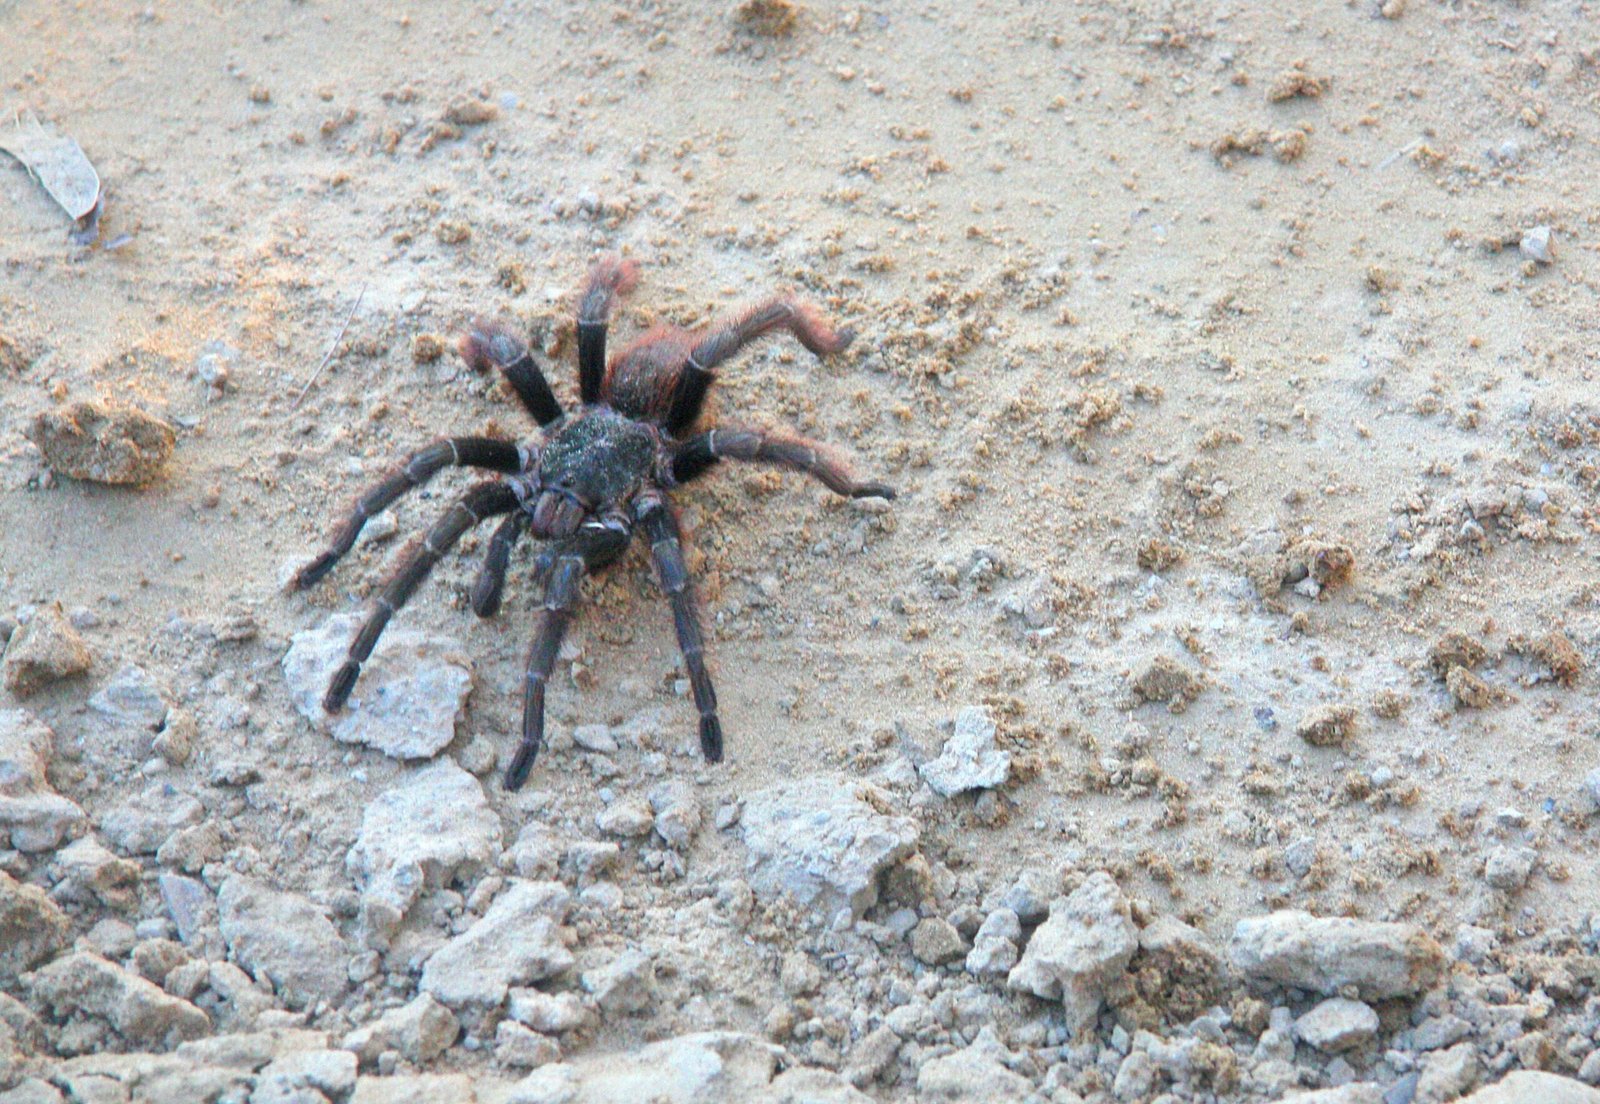 Are There Specific Environmental Changes That Lead To Increased Tarantula Predation?